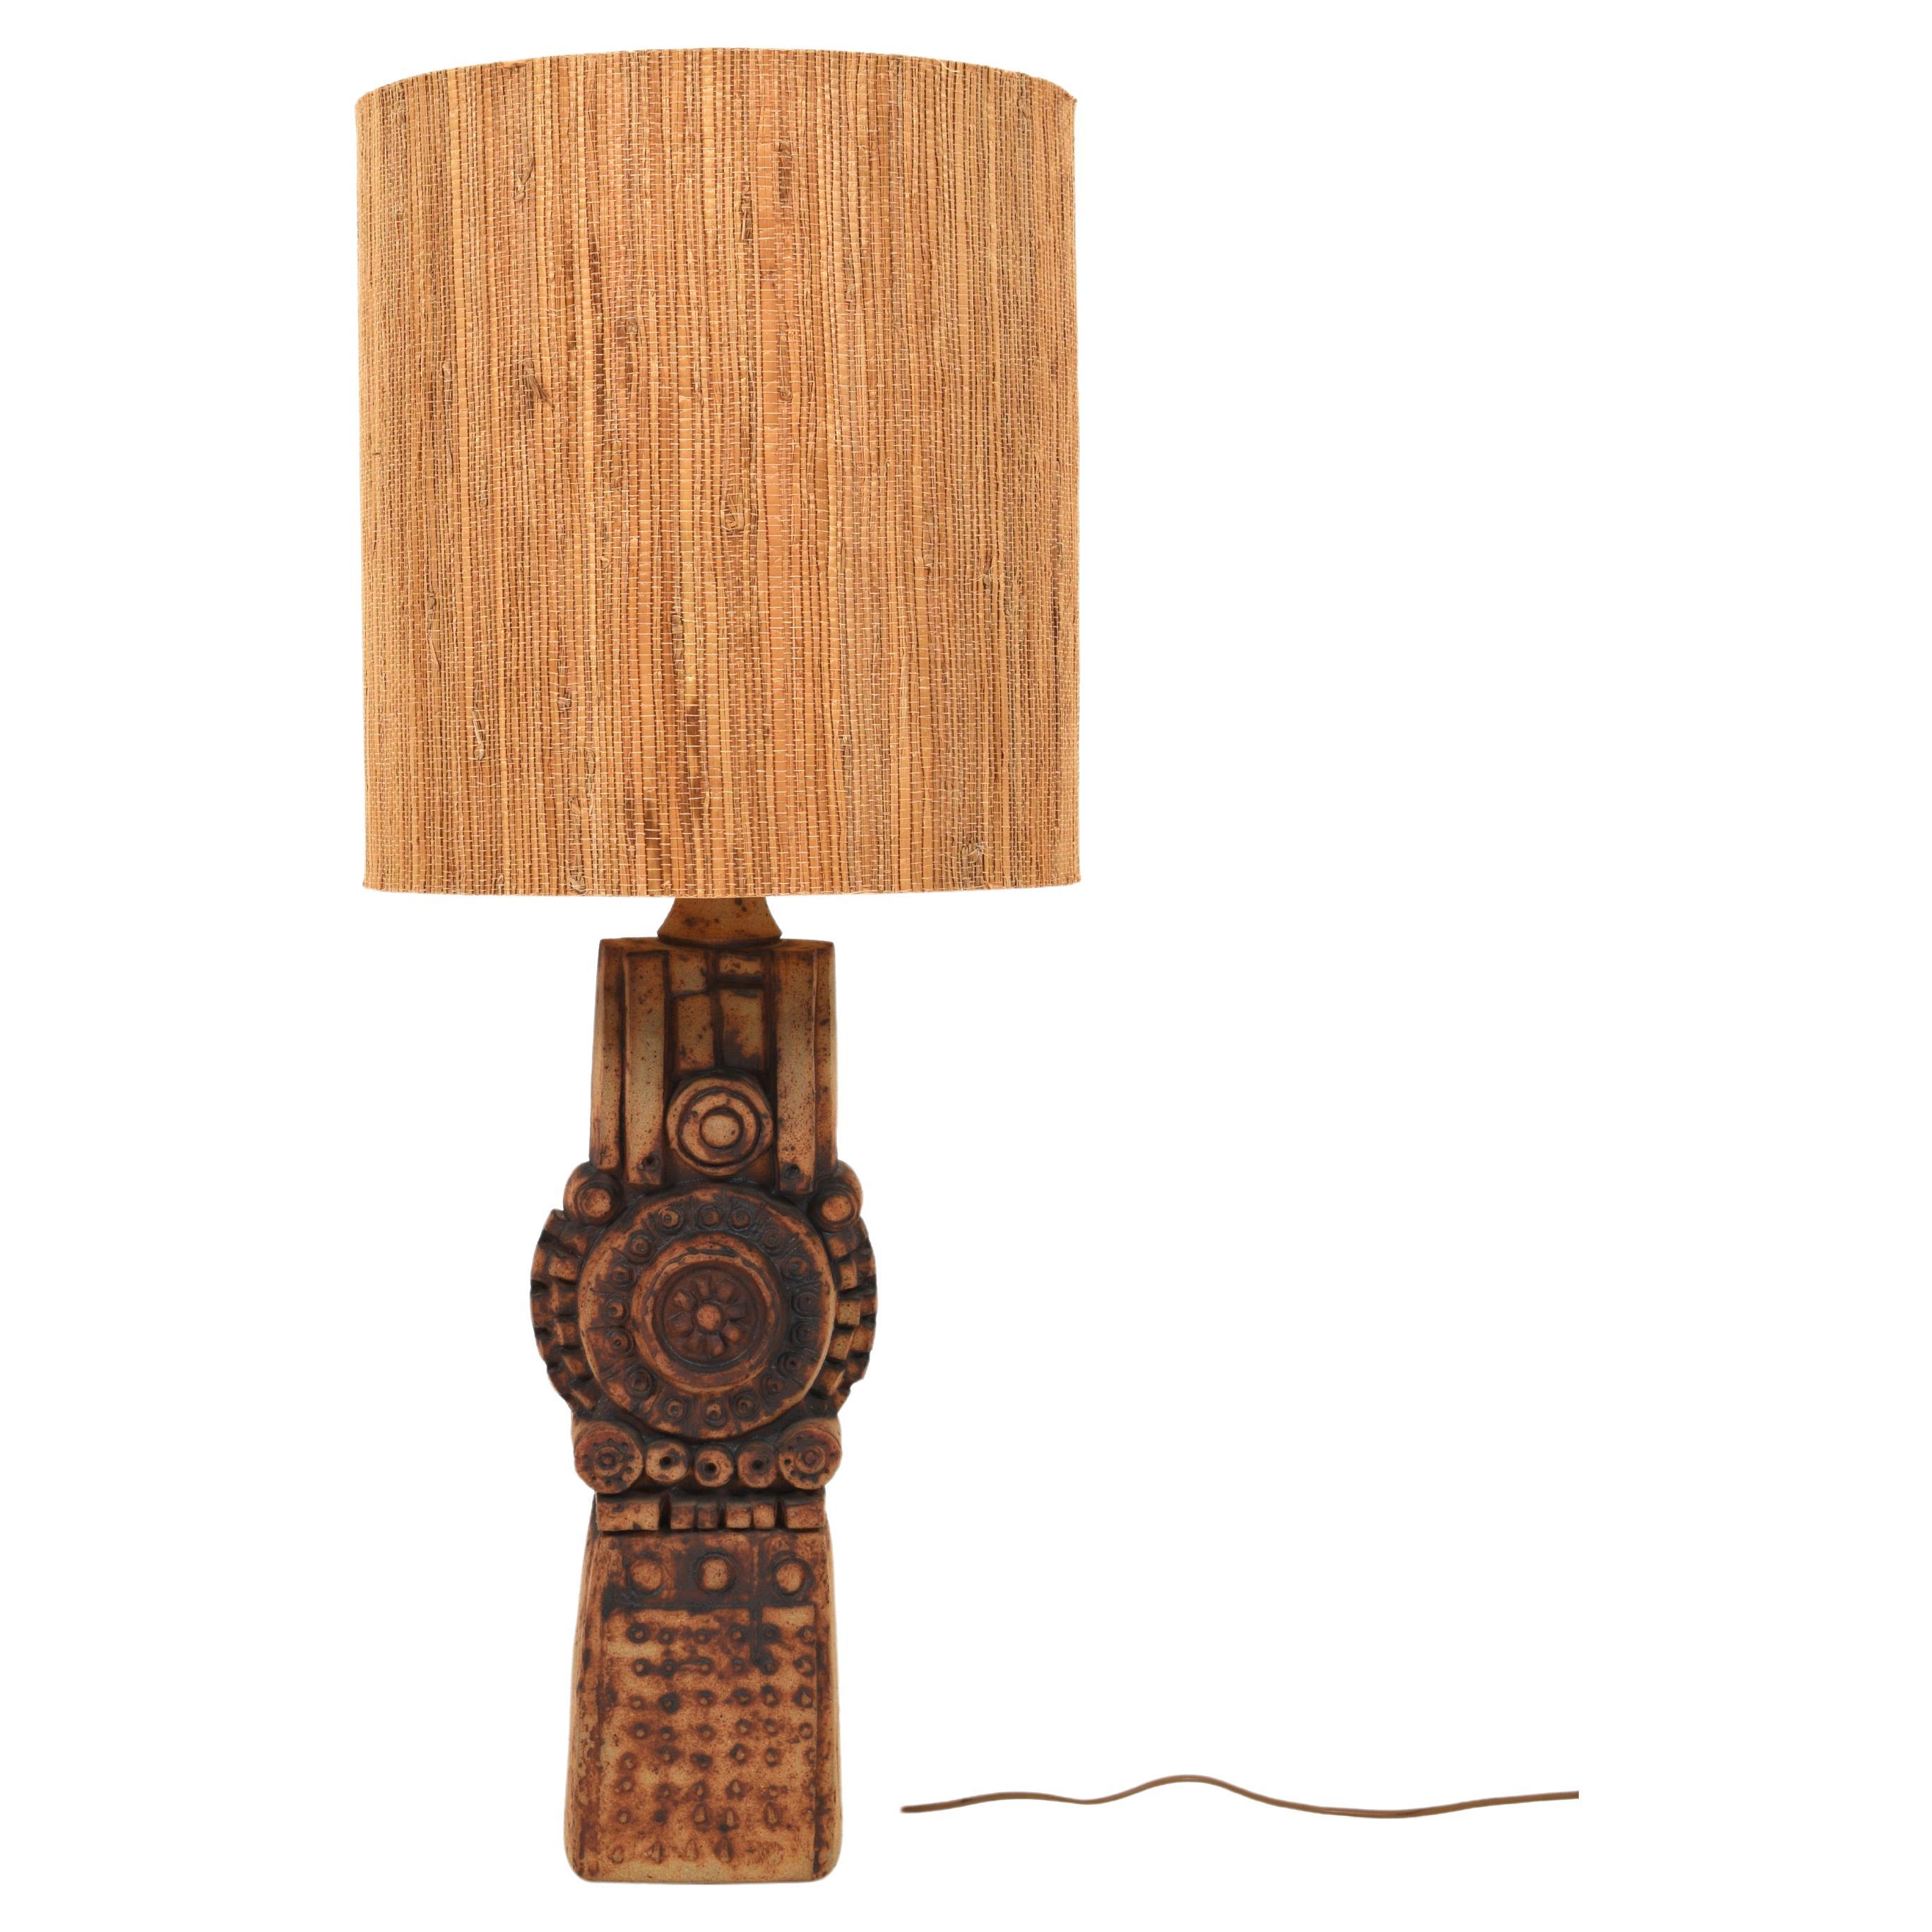 Totem Table Lamp by Bernard Rooke with rattan lampshade, 1970s For Sale